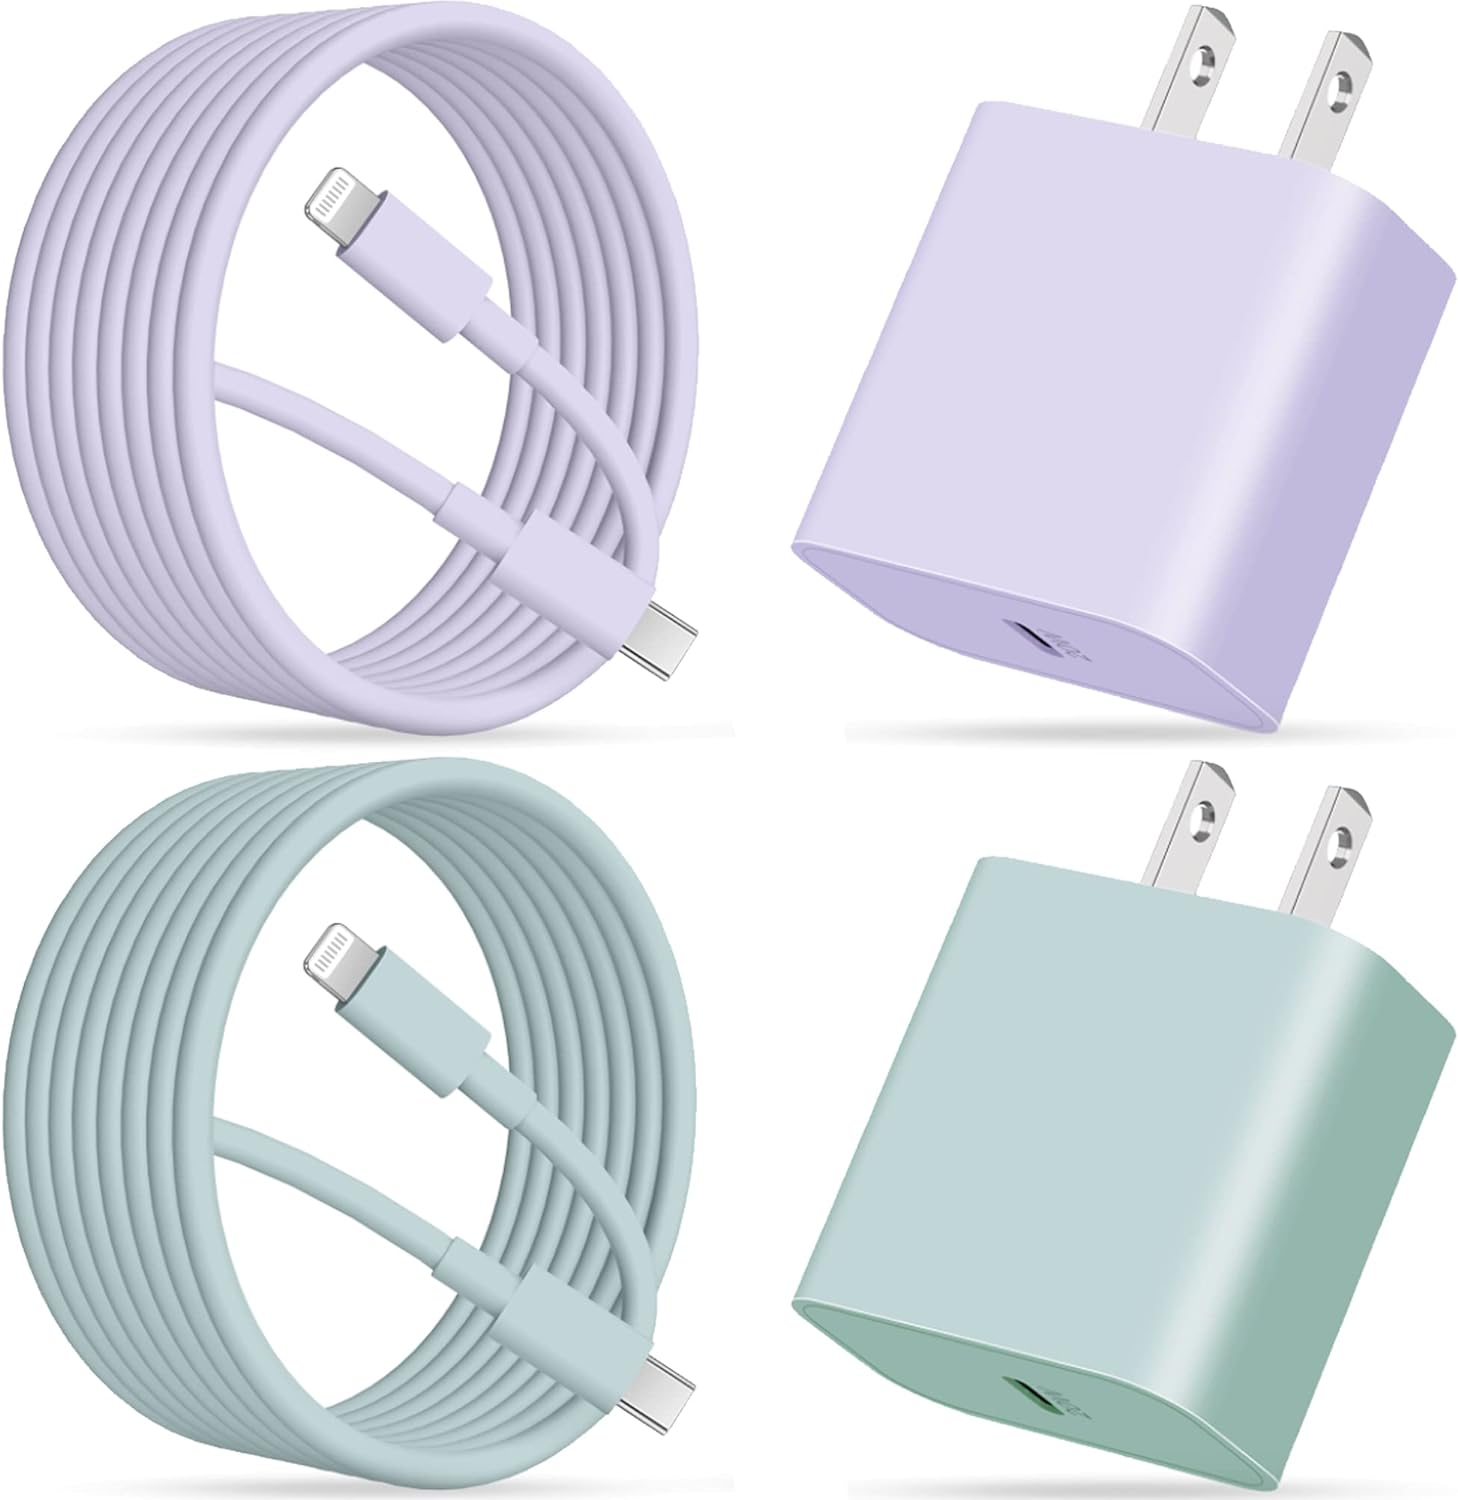 Fast Charger for iPhone 14 13 12 11, 2Pack 20W PD USB C Charger Block Wall Plug with 10FT Long Cable for iPhone 14/Plus/13/12/Pro Max/11/XS/XR, iPad